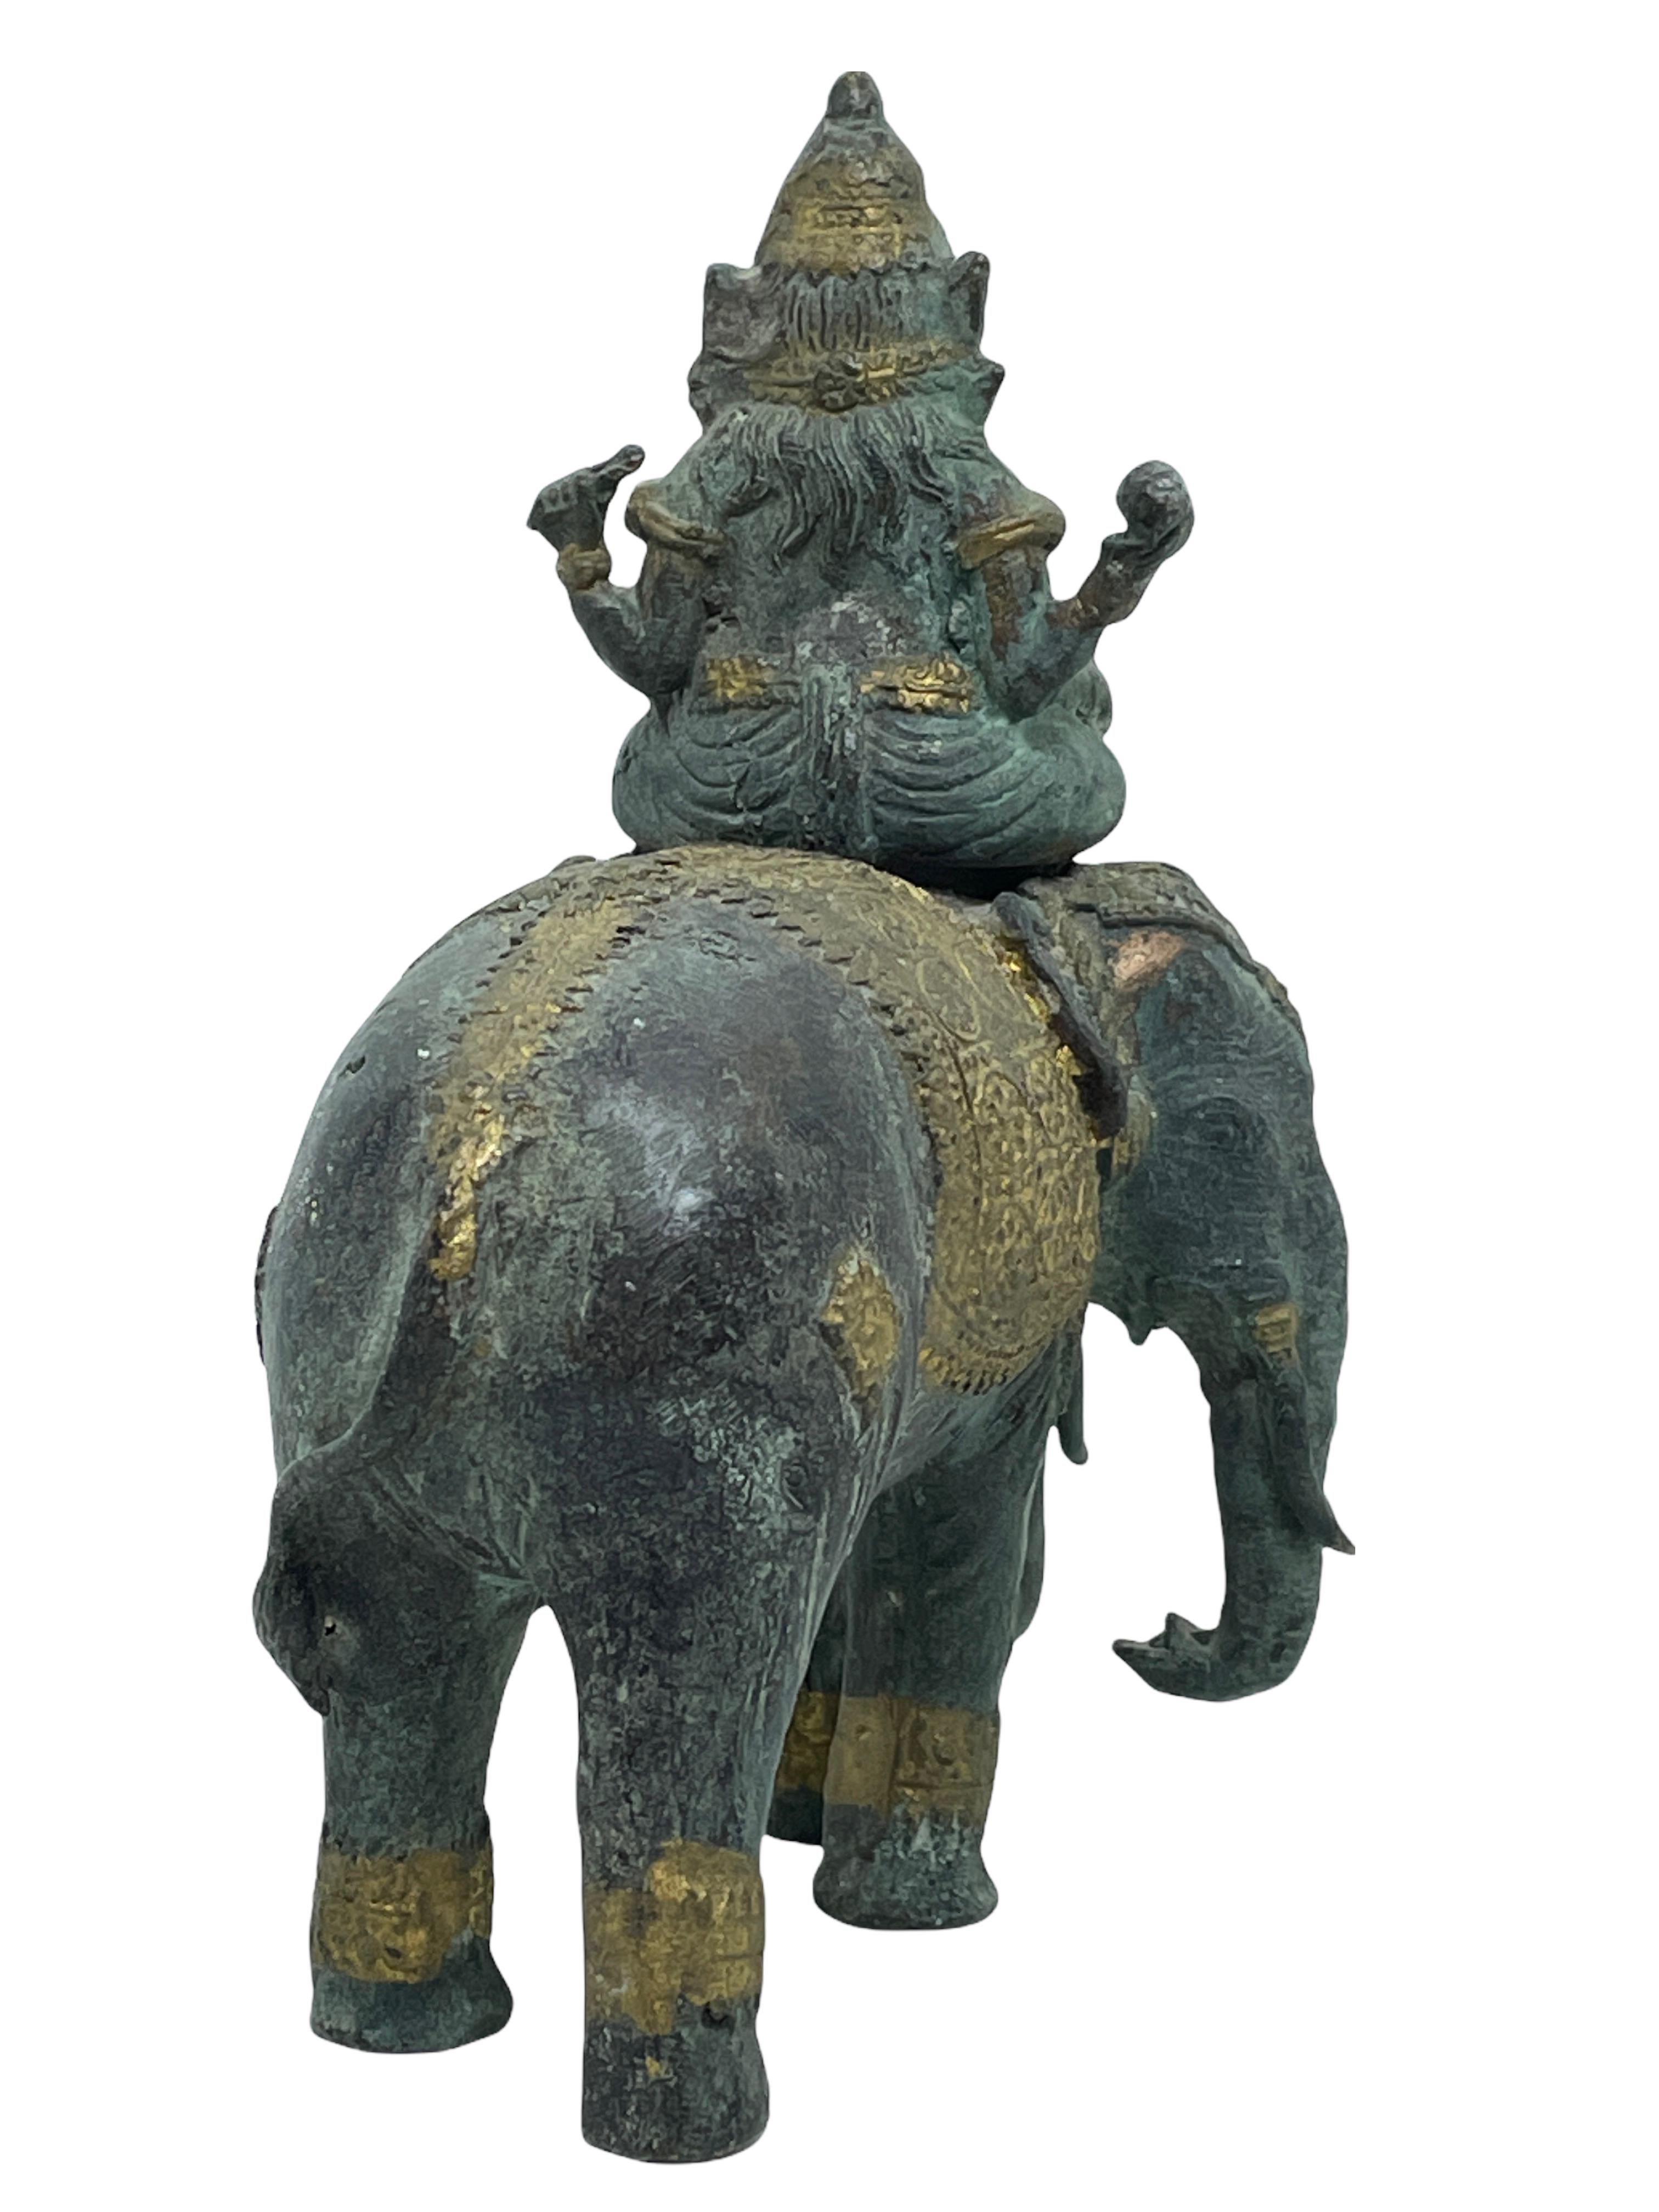 Hand-Crafted Ganesha Ridding Elephant Sculpture Statue Vintage 1950s, India